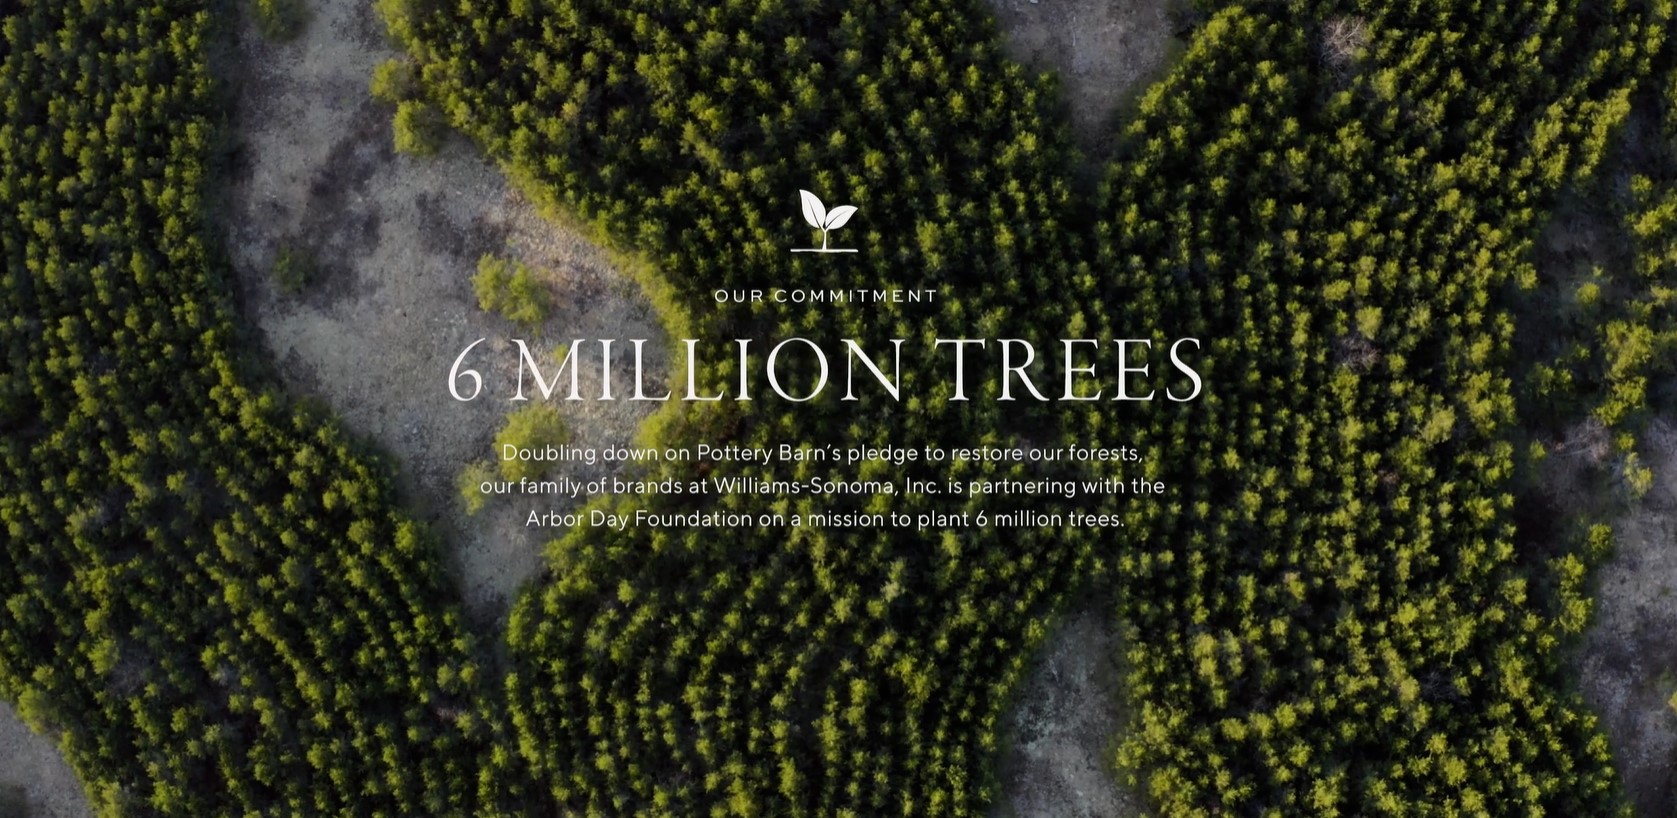 Forest of trees promoting Pottery Barn's Plant a Tree initiative